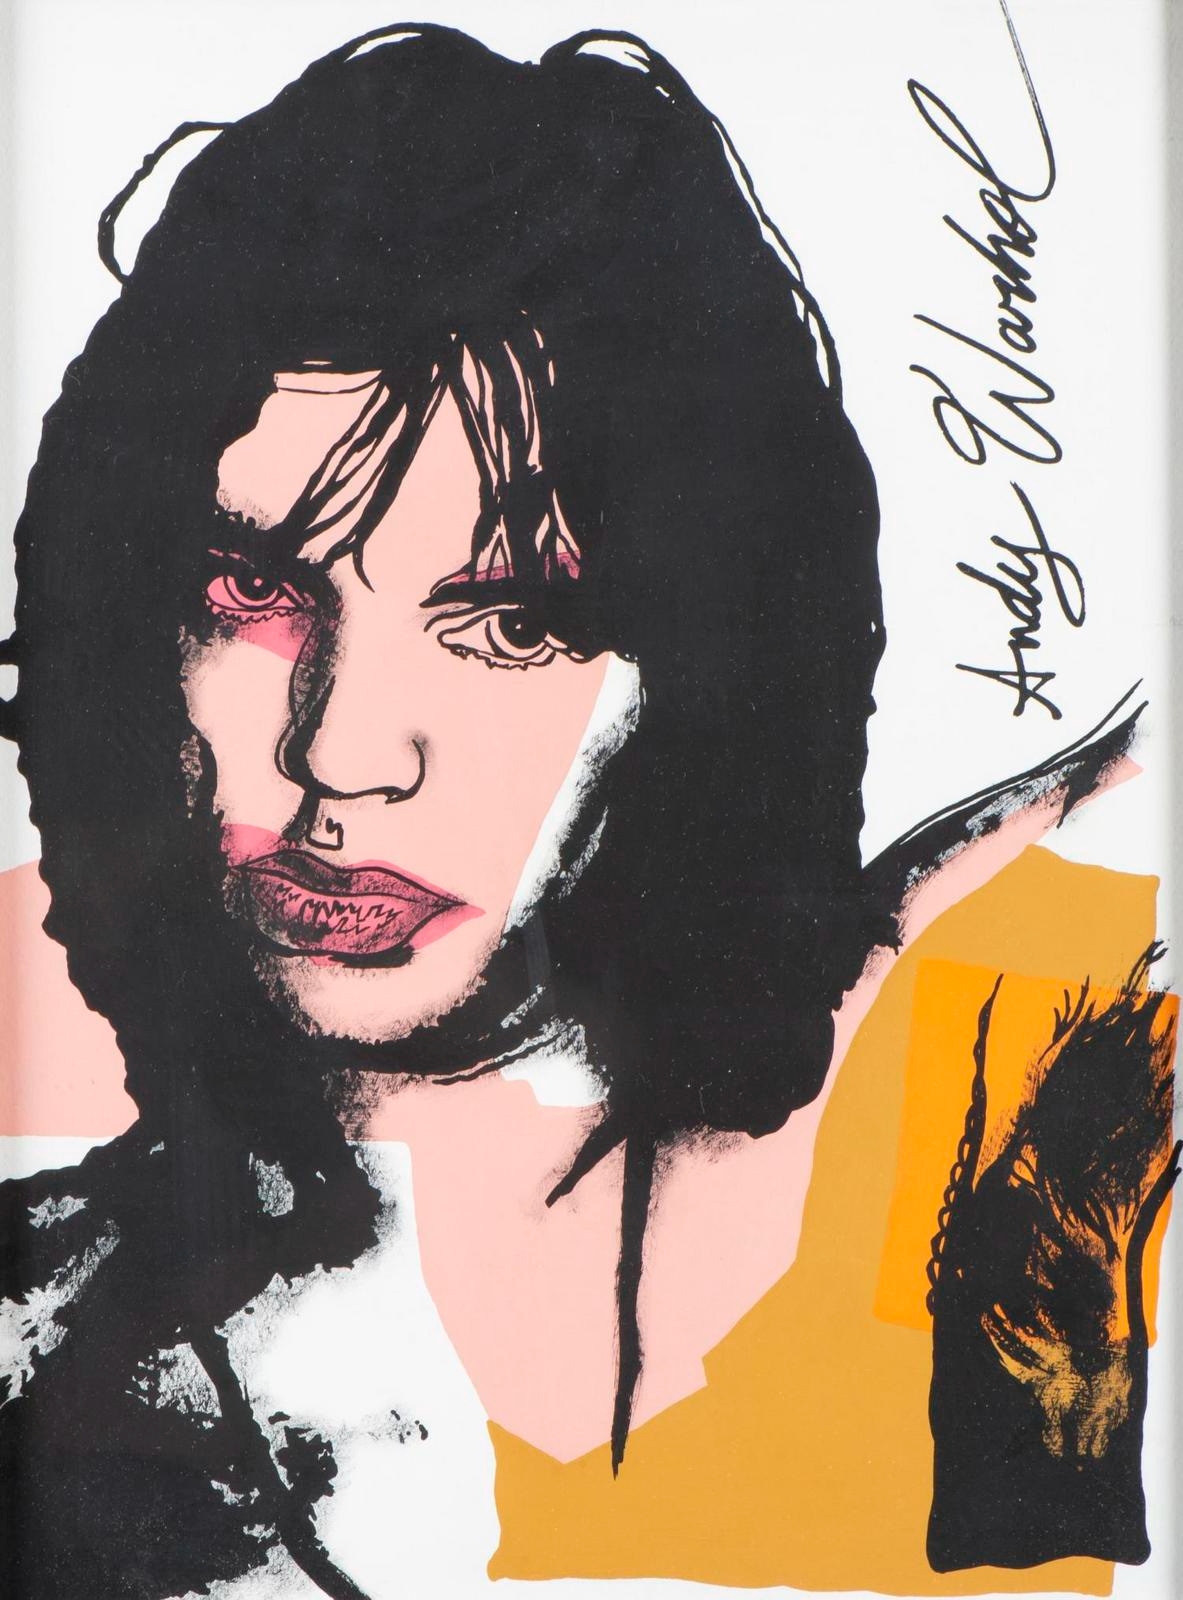 Mike Jagger by Andy Warhol